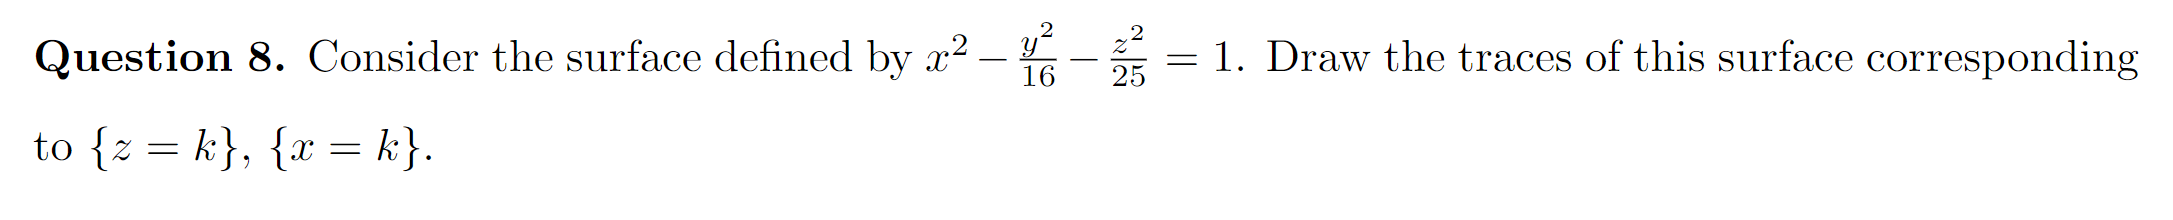 Question 8. Consider the surface defined by x² – - = 1. Draw the traces of this surface corresponding
%3|
25
to {z = k}, {x = k}.
